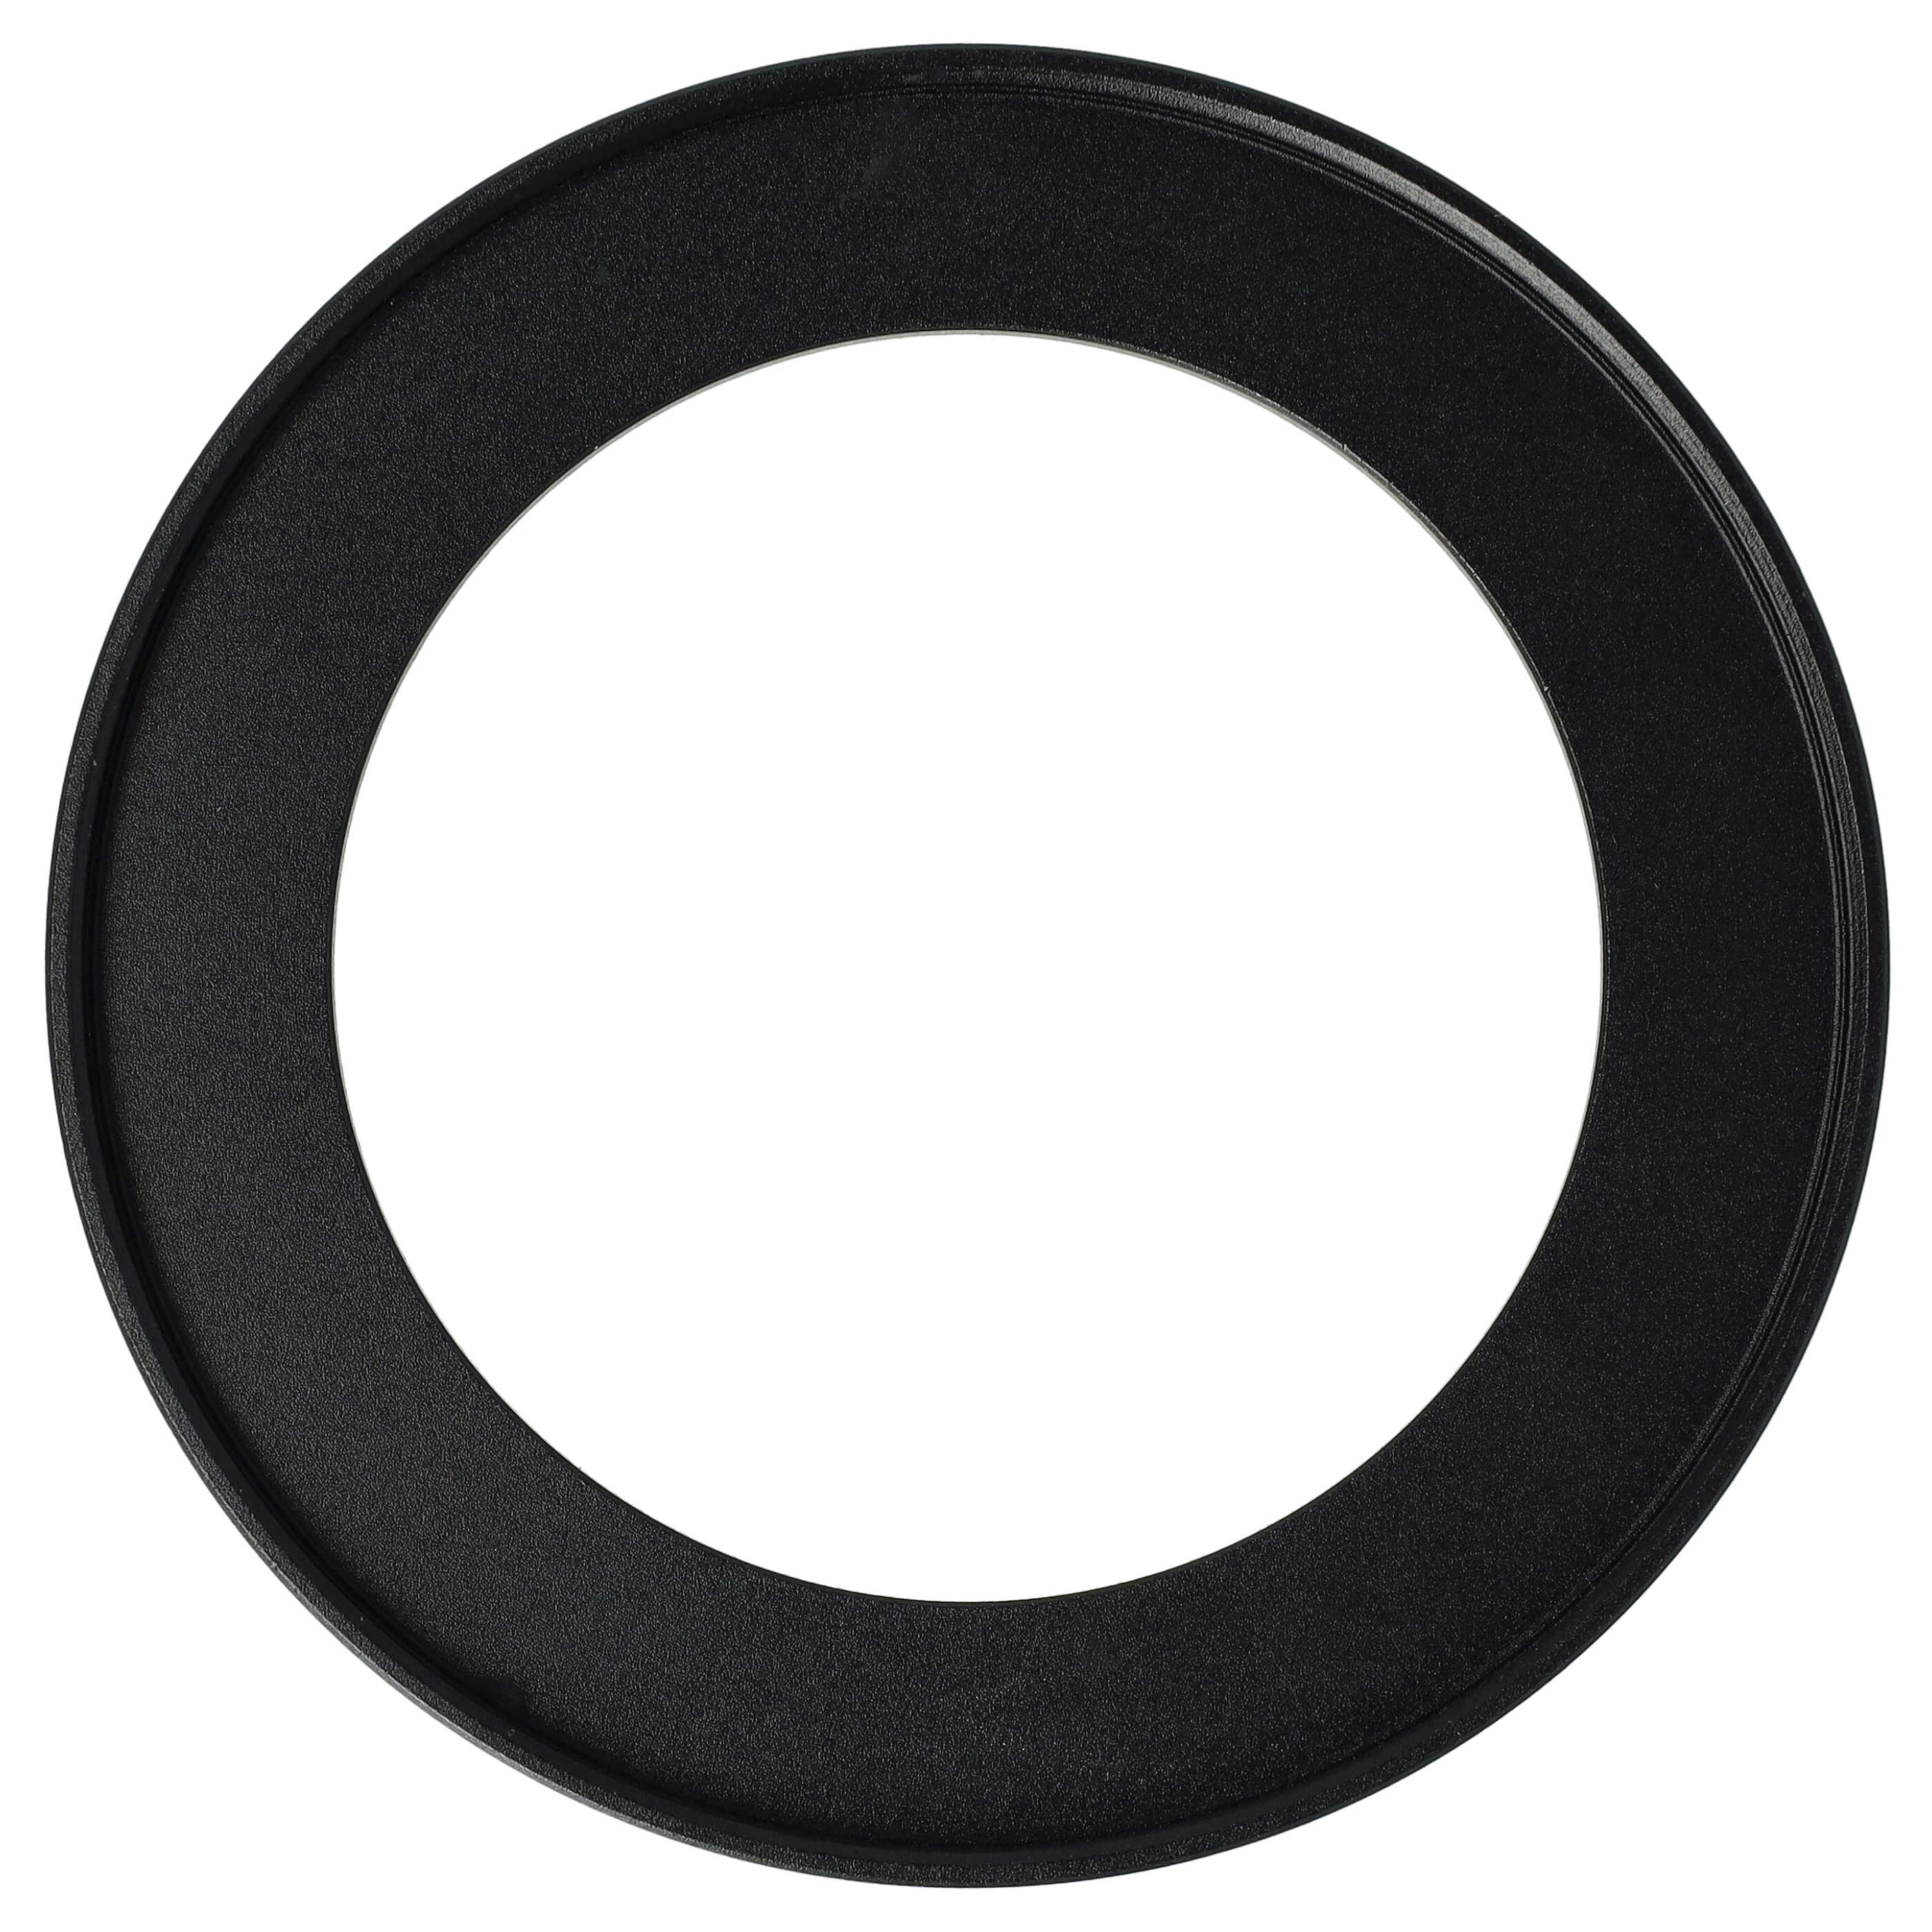 Step-Up Ring Adapter of 58 mm to 77 mmfor various Camera Lens - Filter Adapter